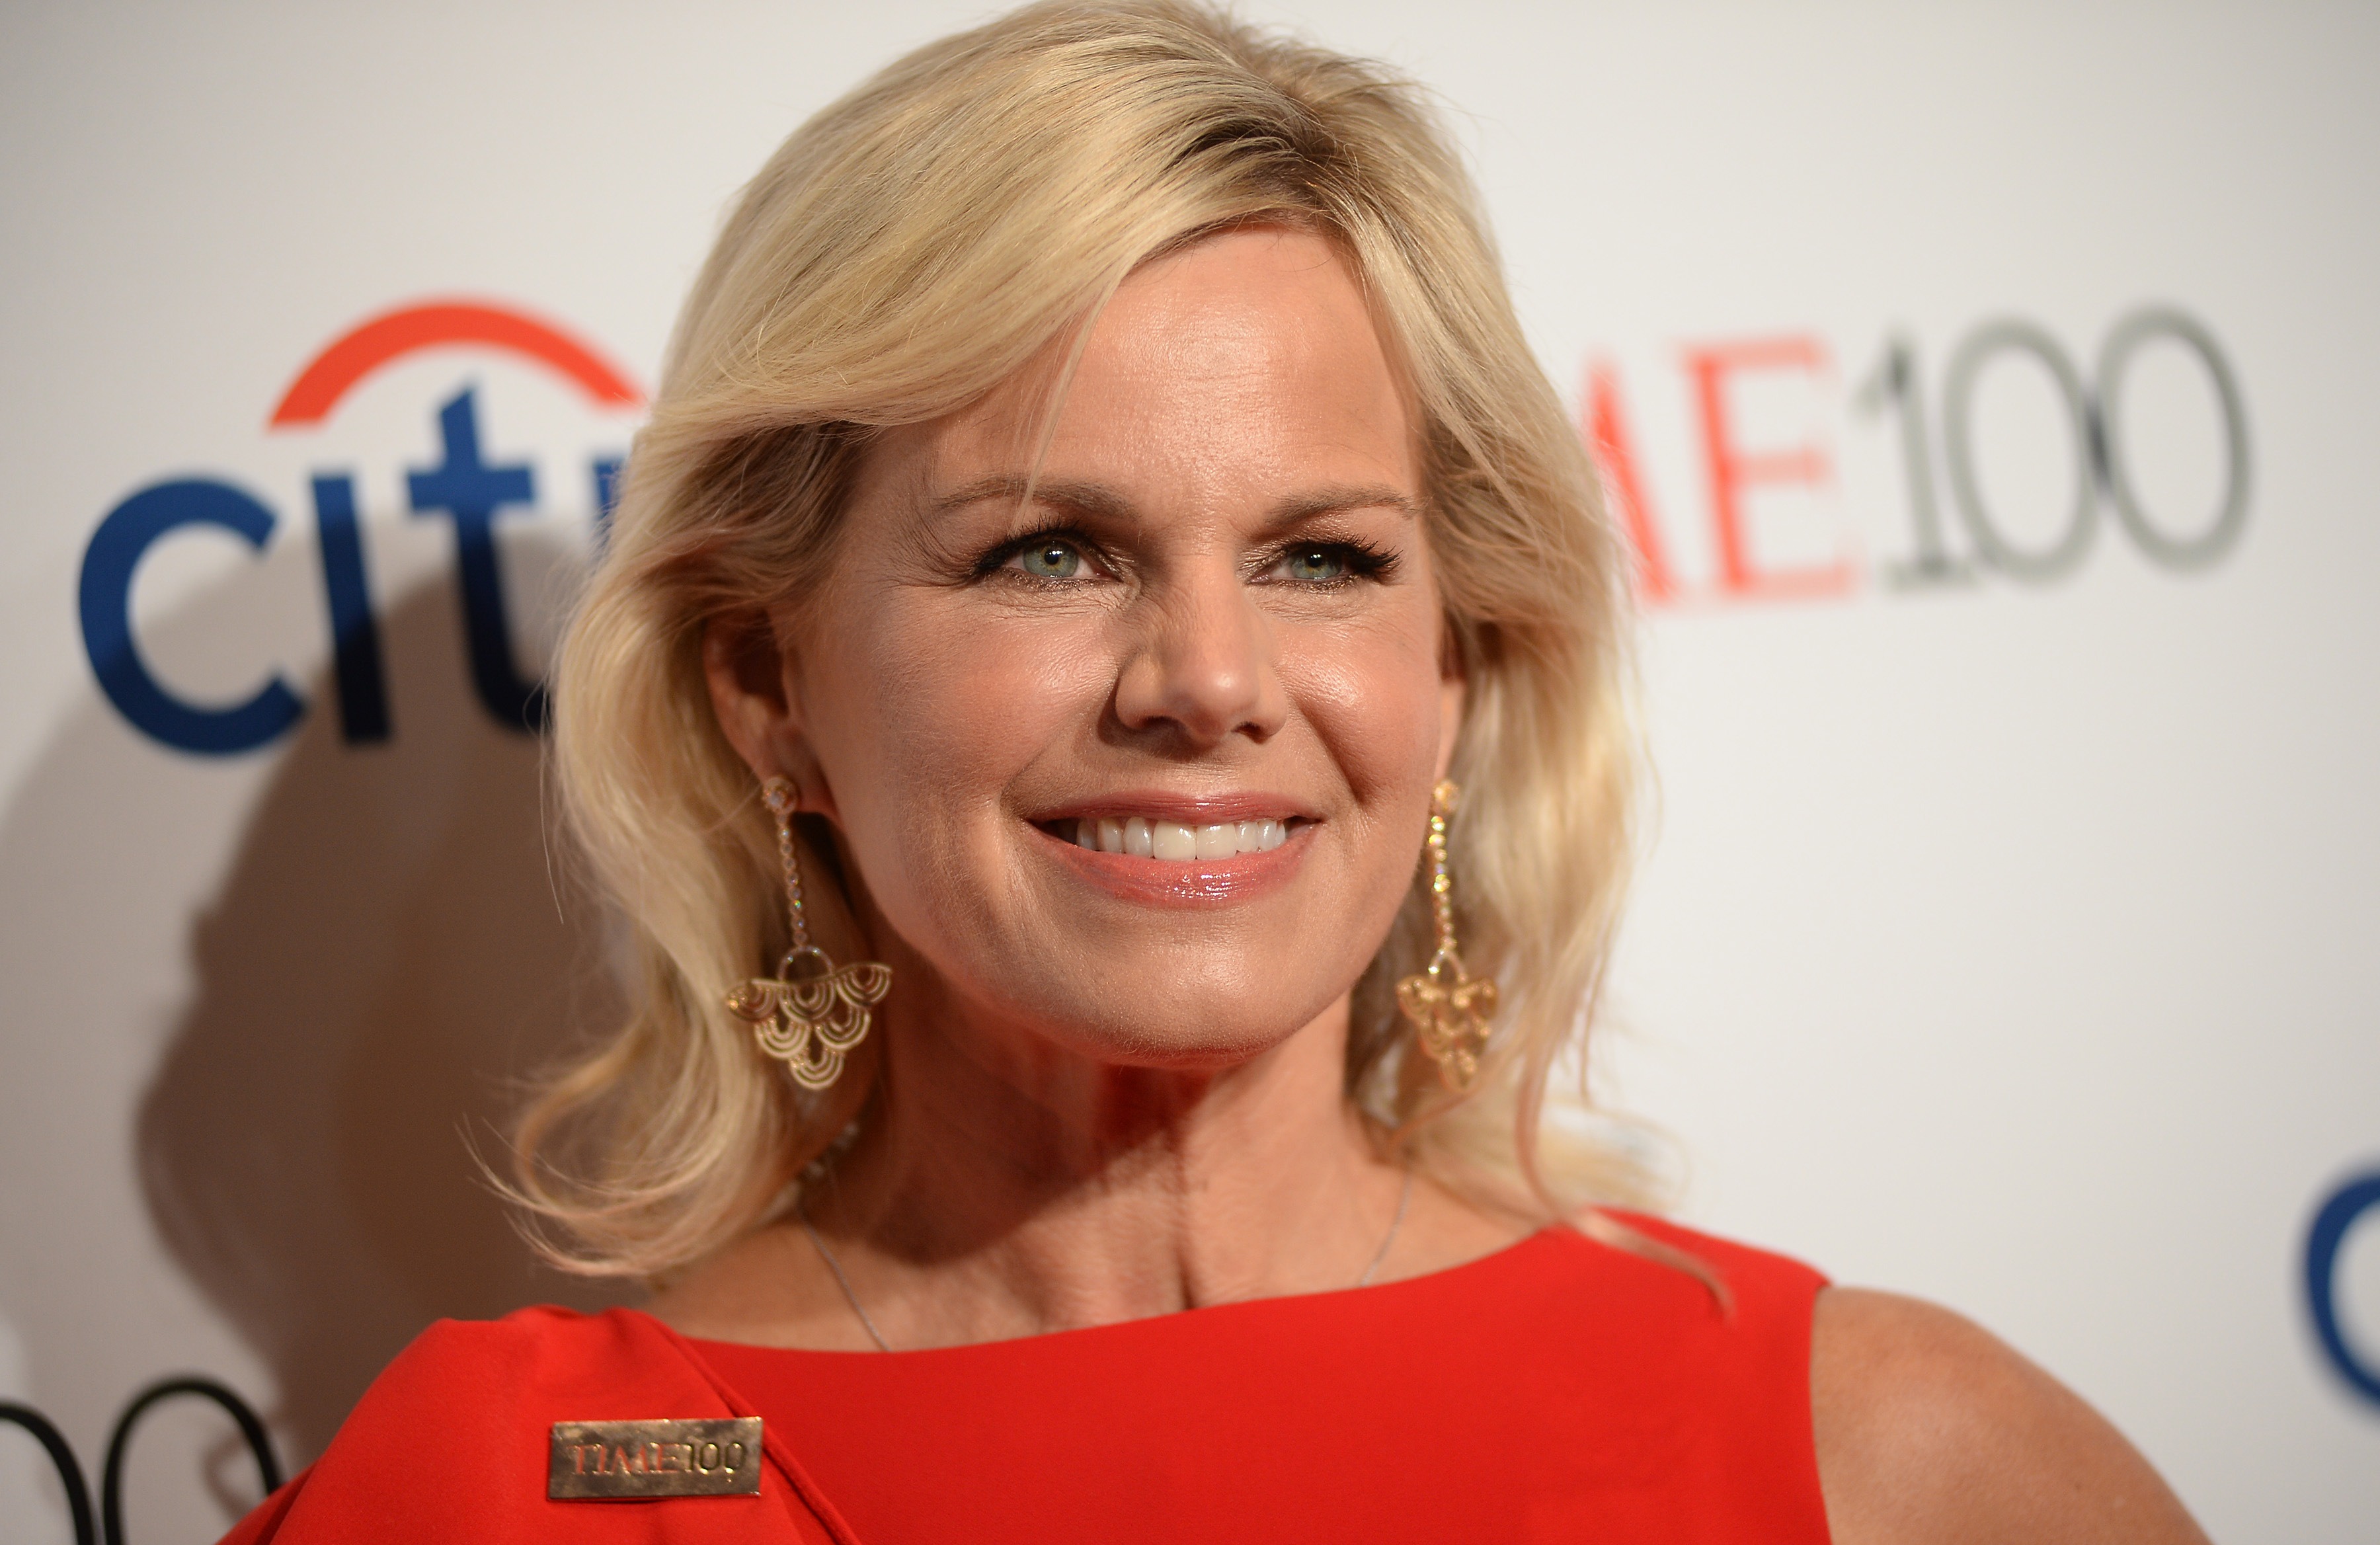 andy dorsett share nude pictures of gretchen carlson photos